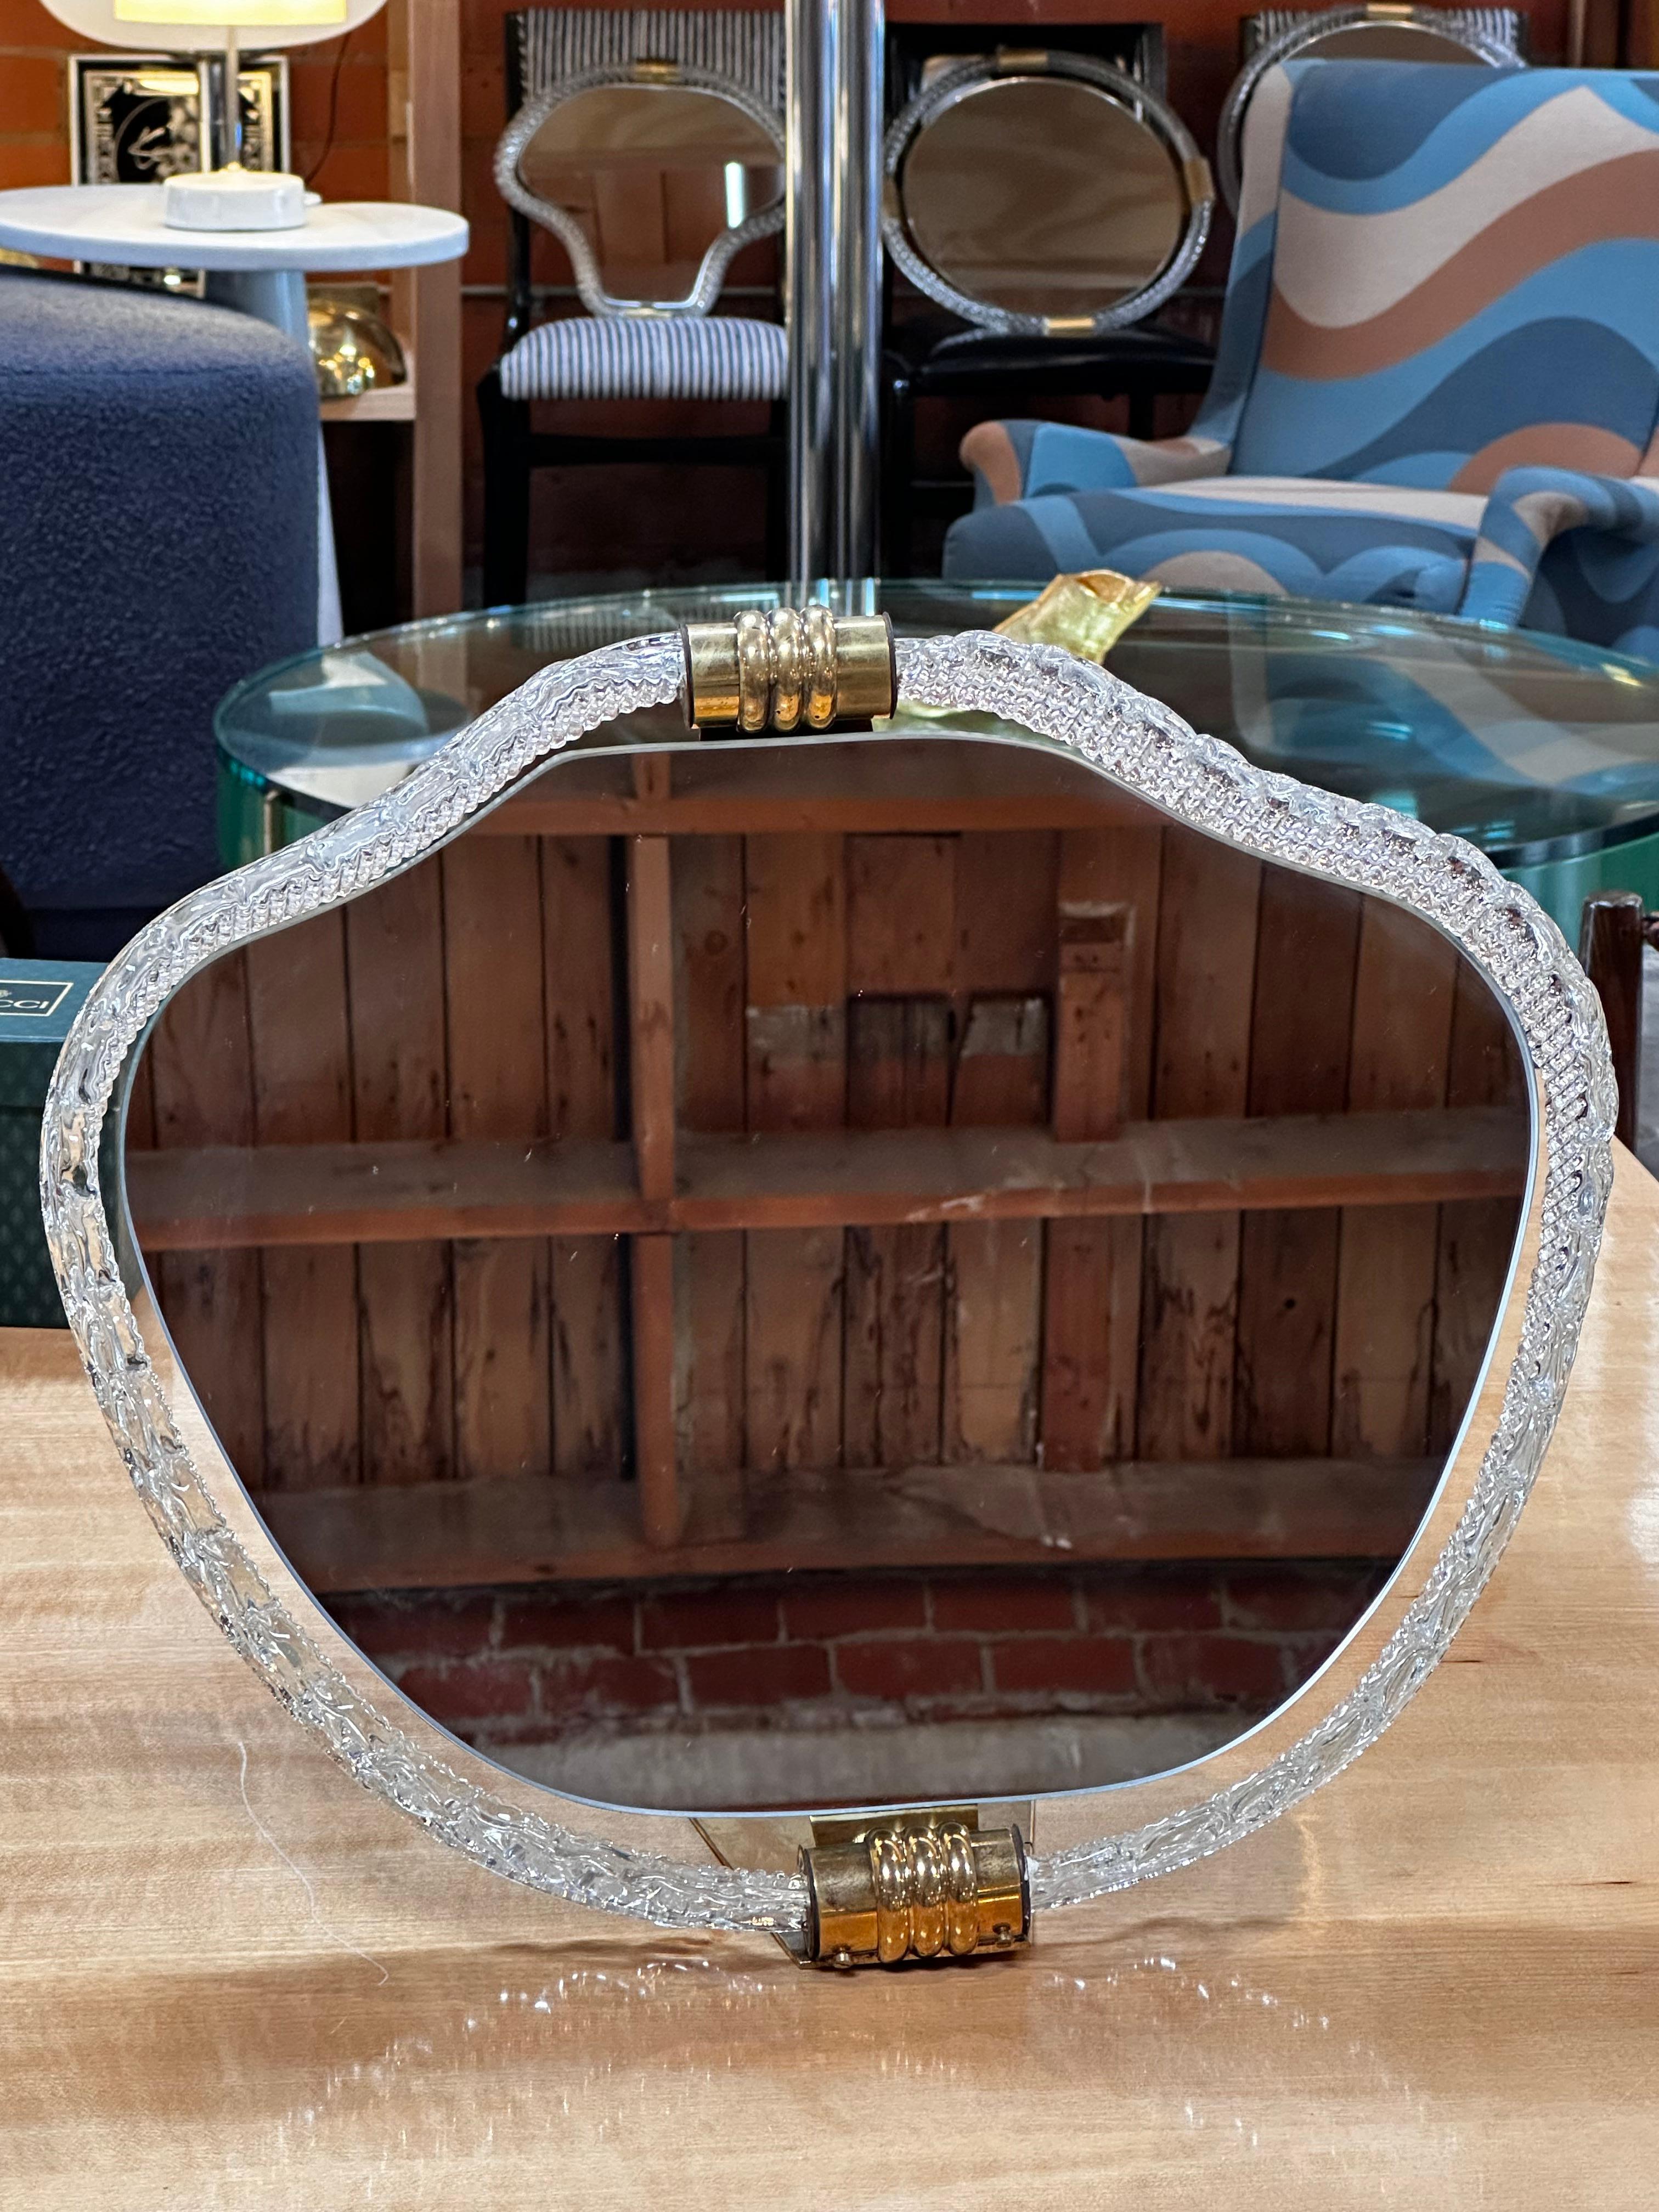 The Vintage Italian Murano Vanity Mirror from the 1940s is a classic and elegant piece of decorative furniture. Crafted in Murano, Italy, during the mid-20th century, it likely features the distinctive artistry and craftsmanship associated with